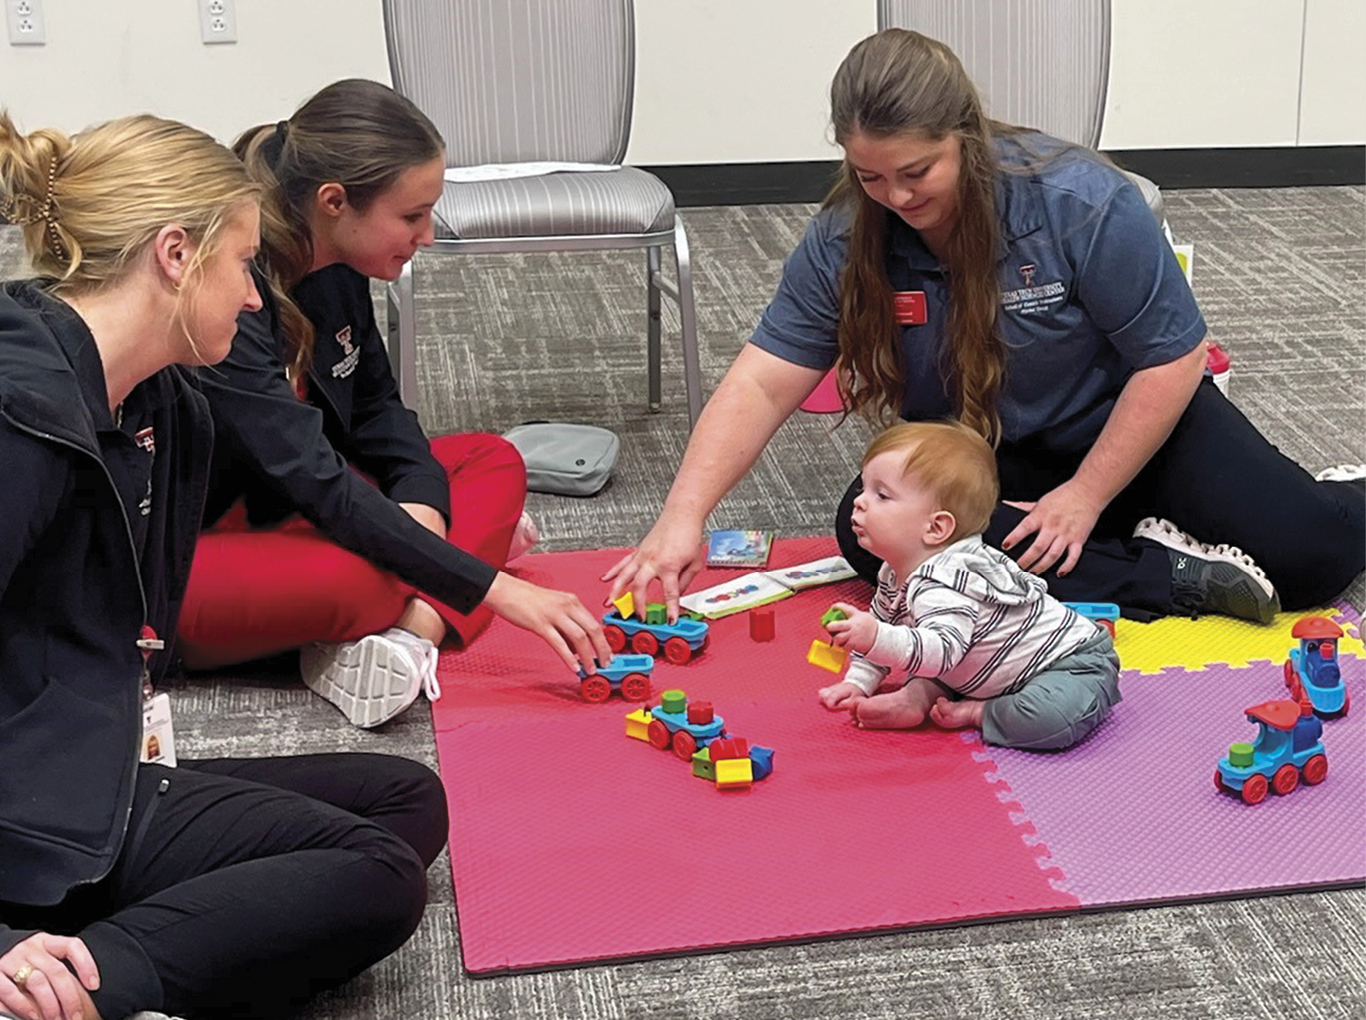 TTUHSC students playing with toddler at event